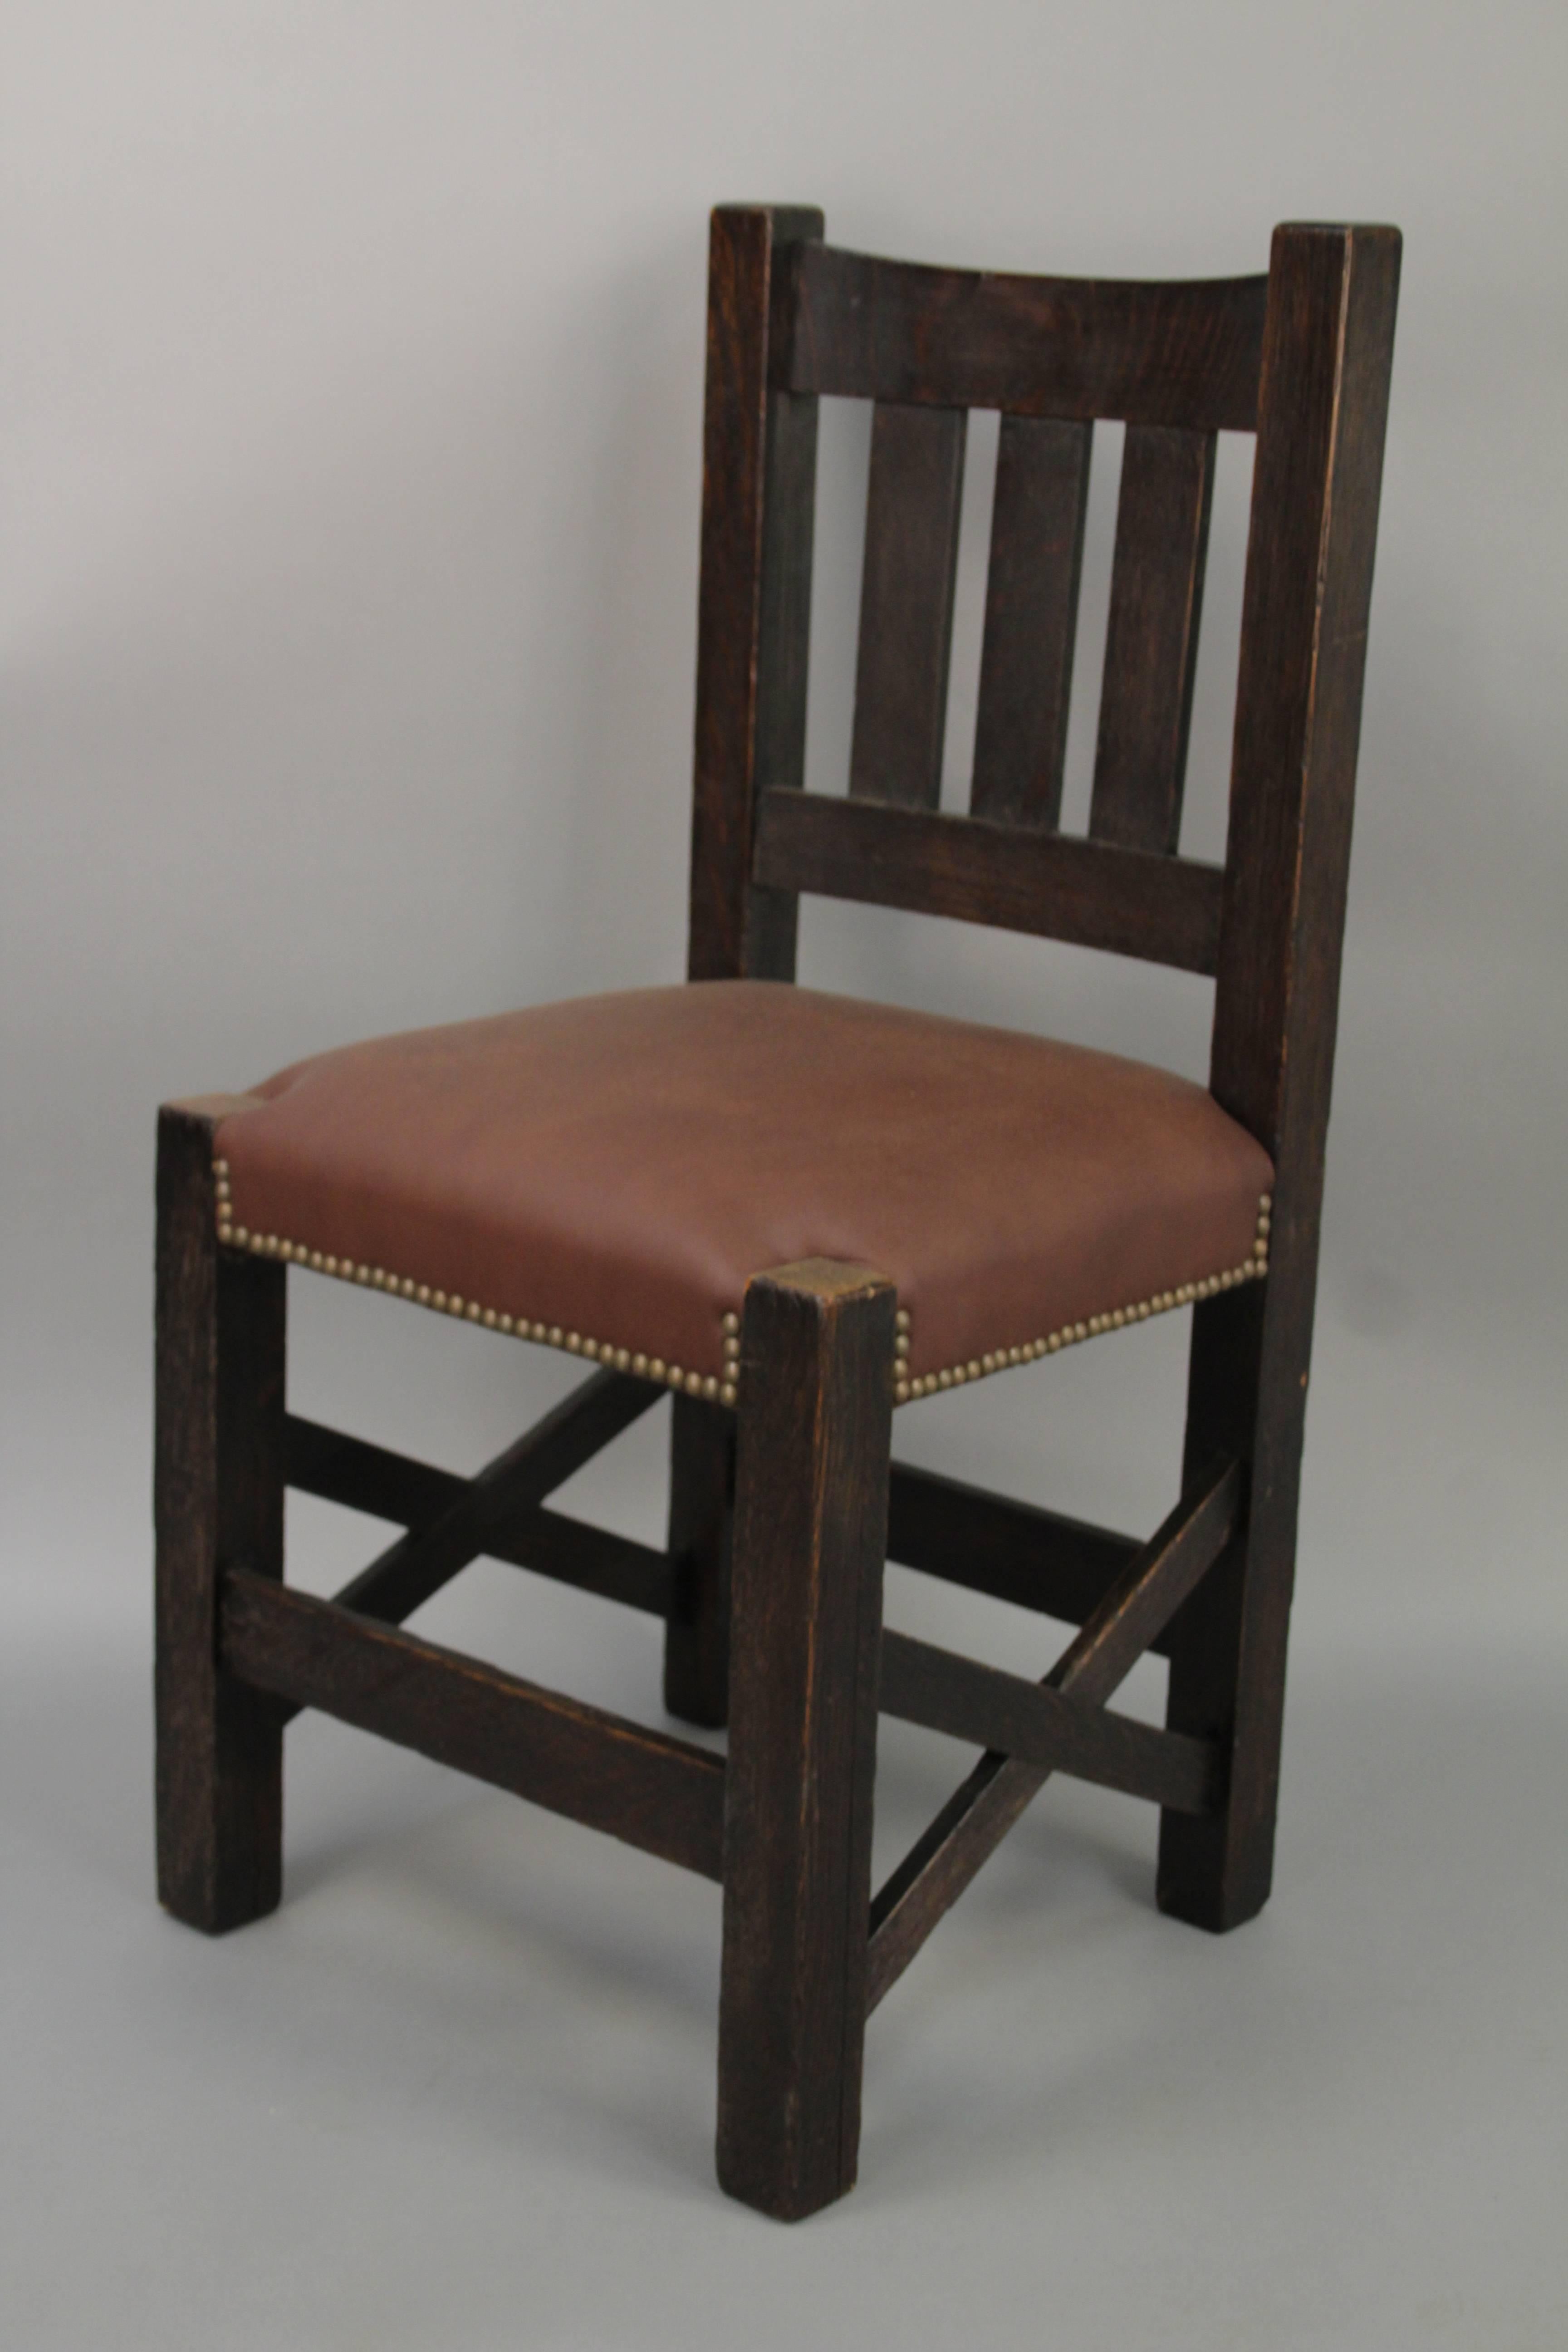 Arts & Crafts side chair with cross stretchers and leather seat.